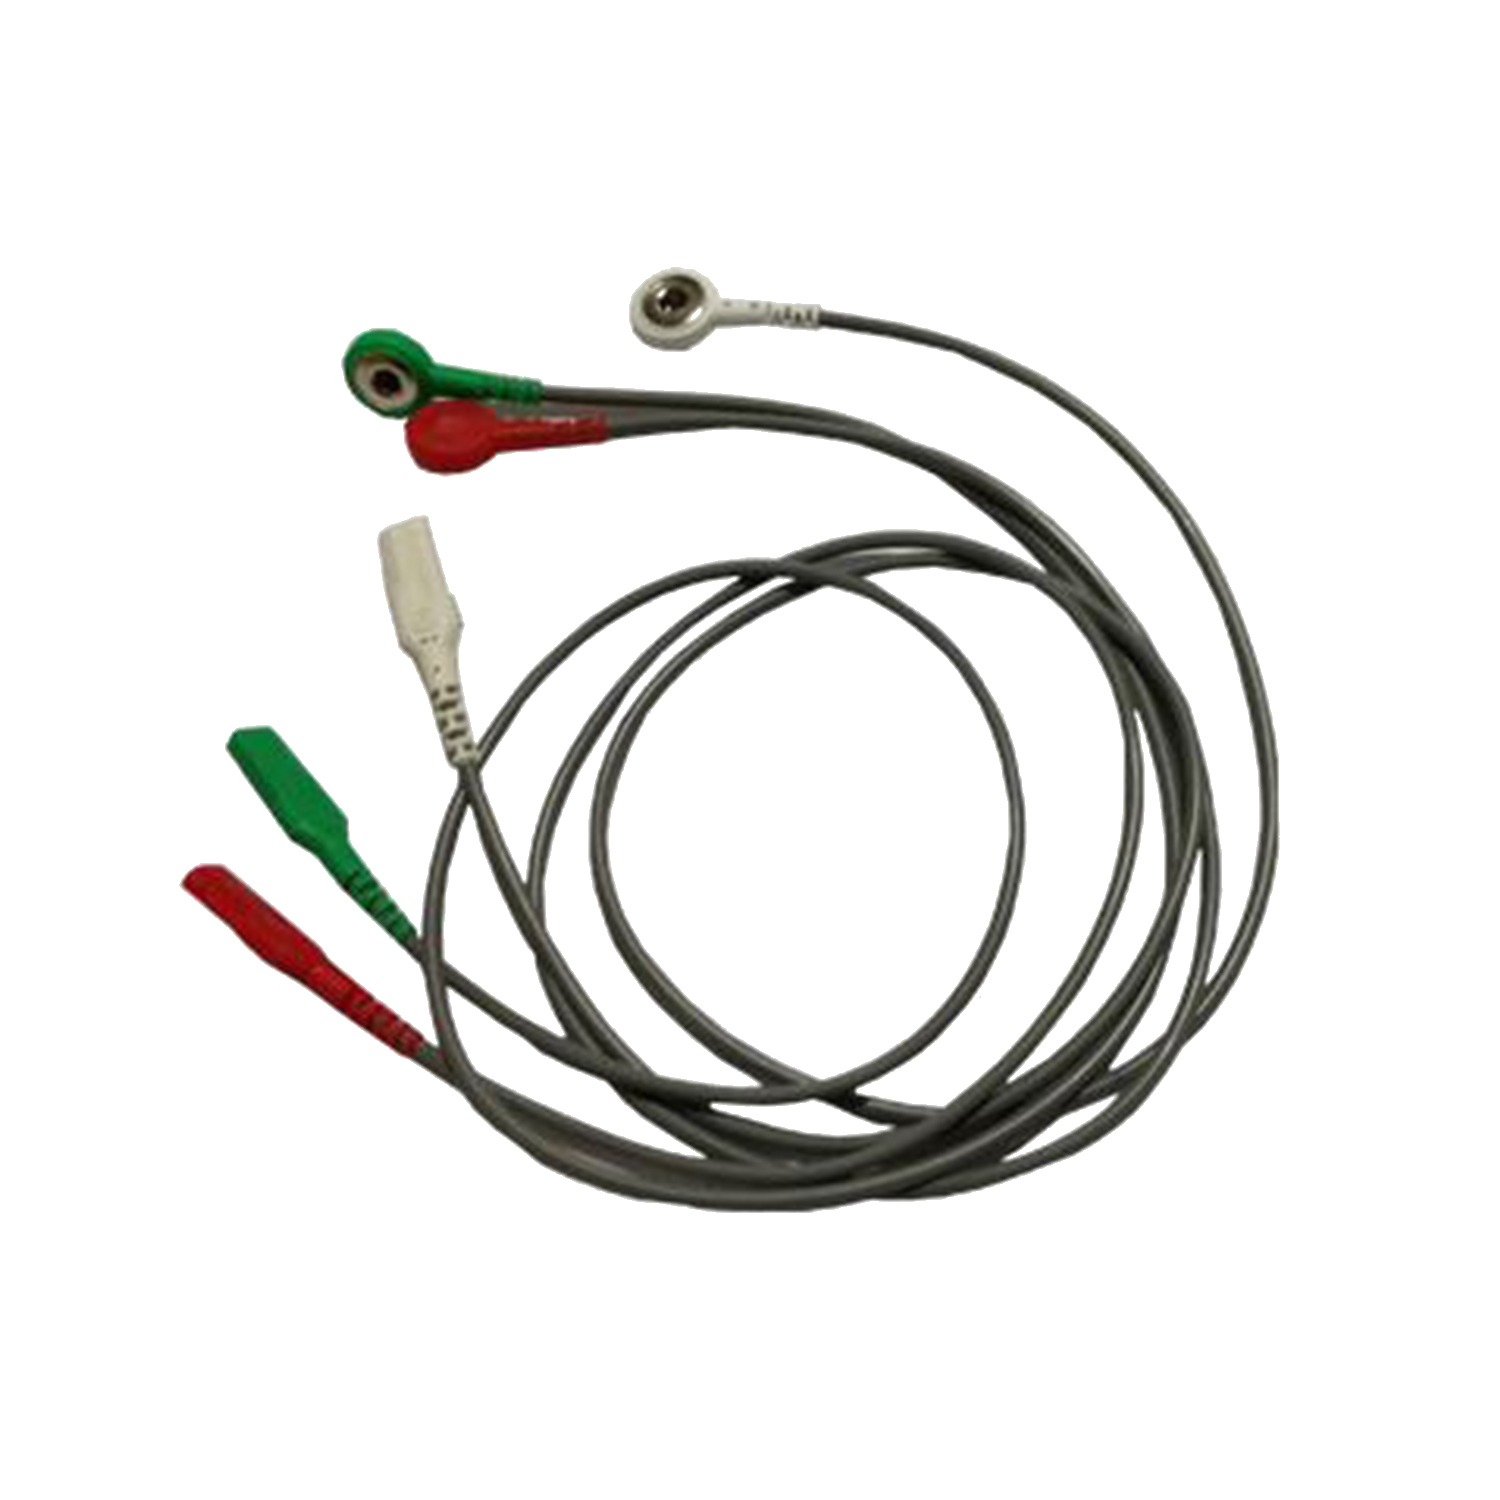 3 Lead ECG Snap To Dual Socket Leadwire Set for Telemetry Use